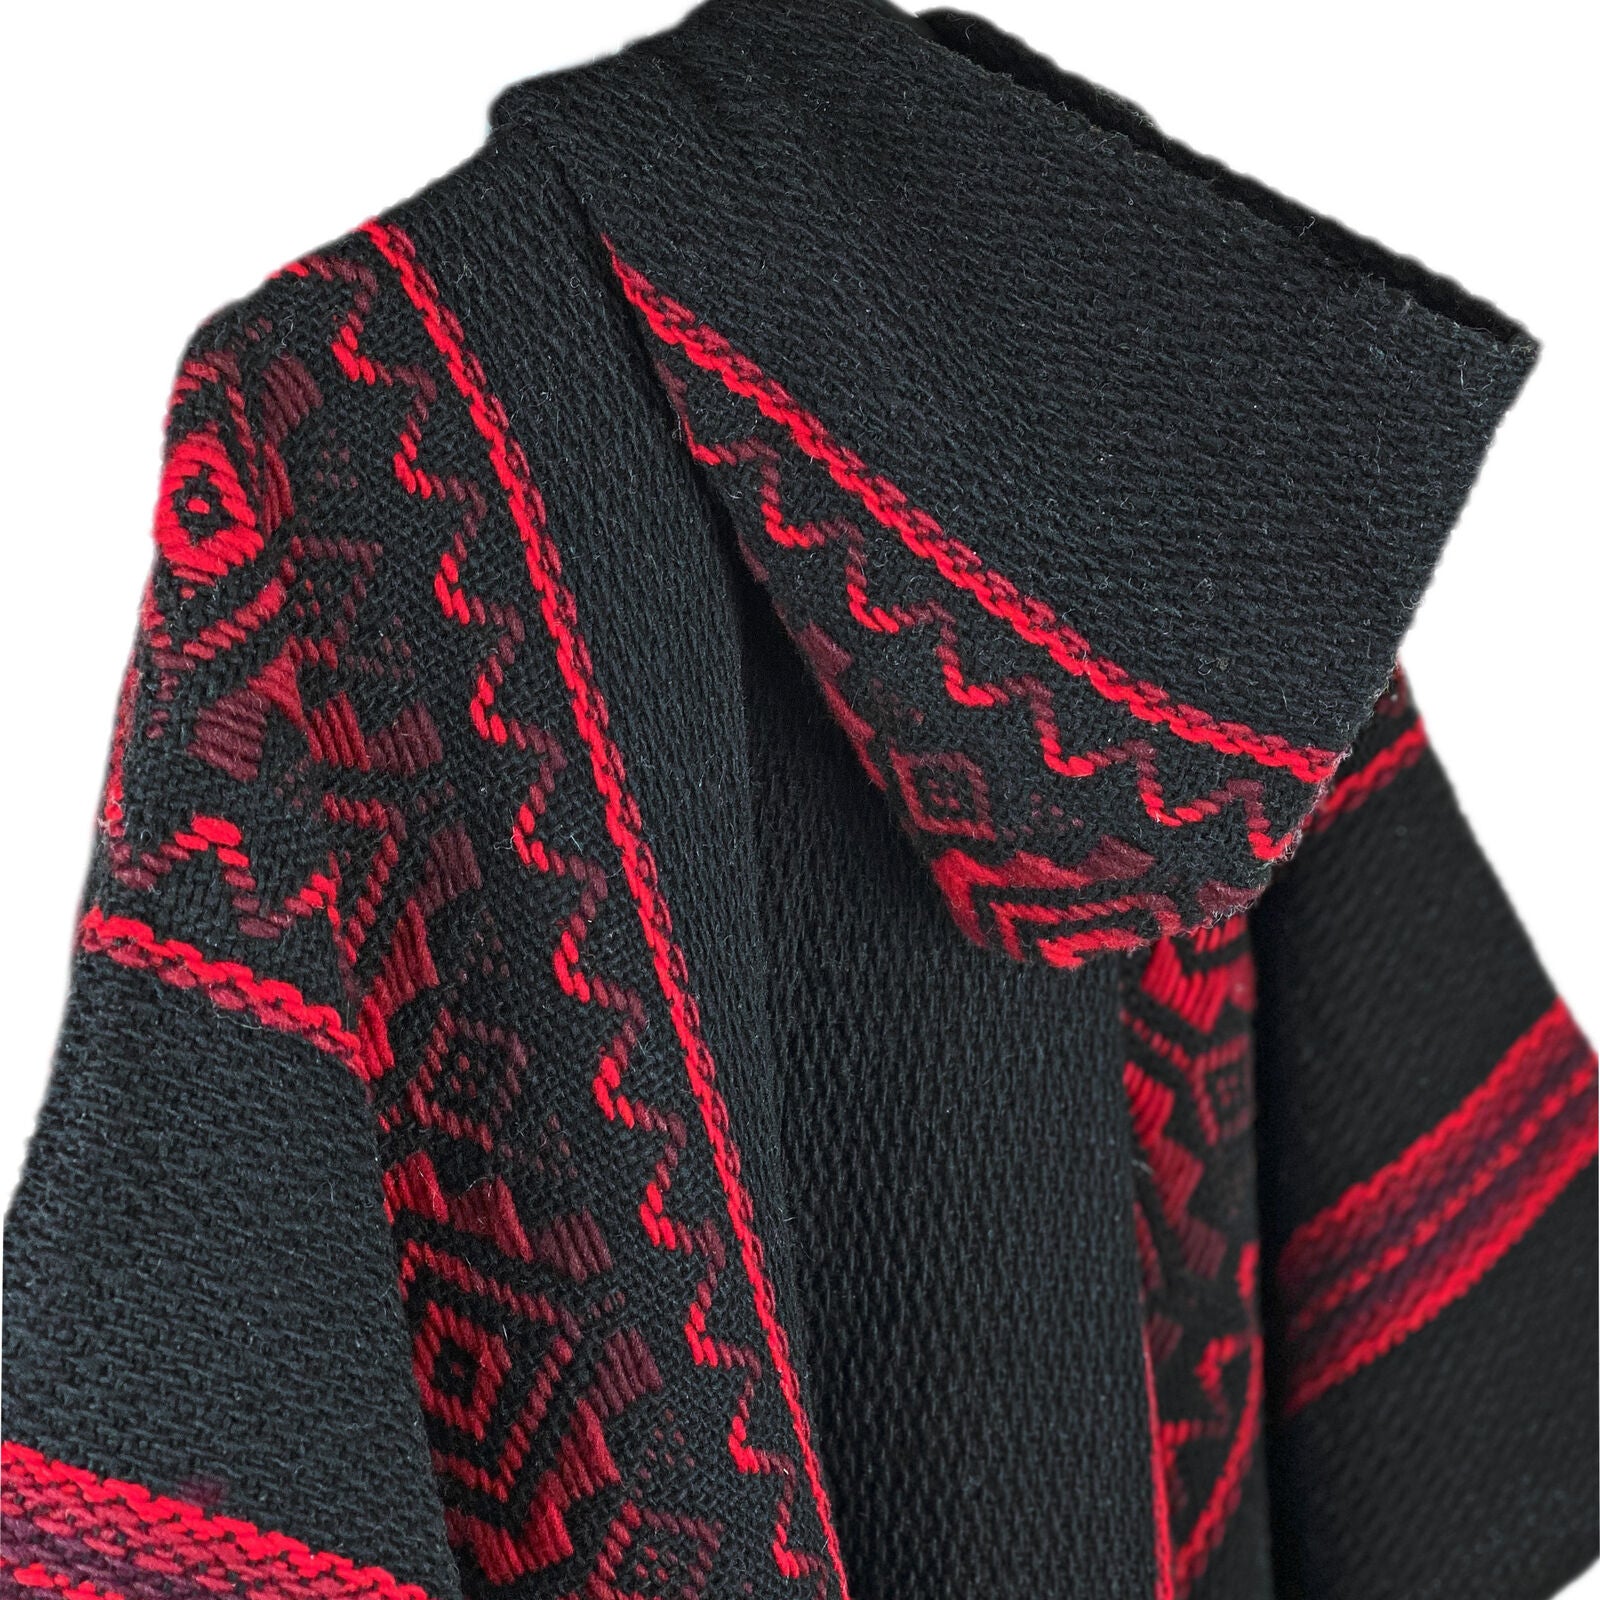 Llama Wool Unisex South American Handwoven Hooded Poncho - solid black with red diamonds pattern